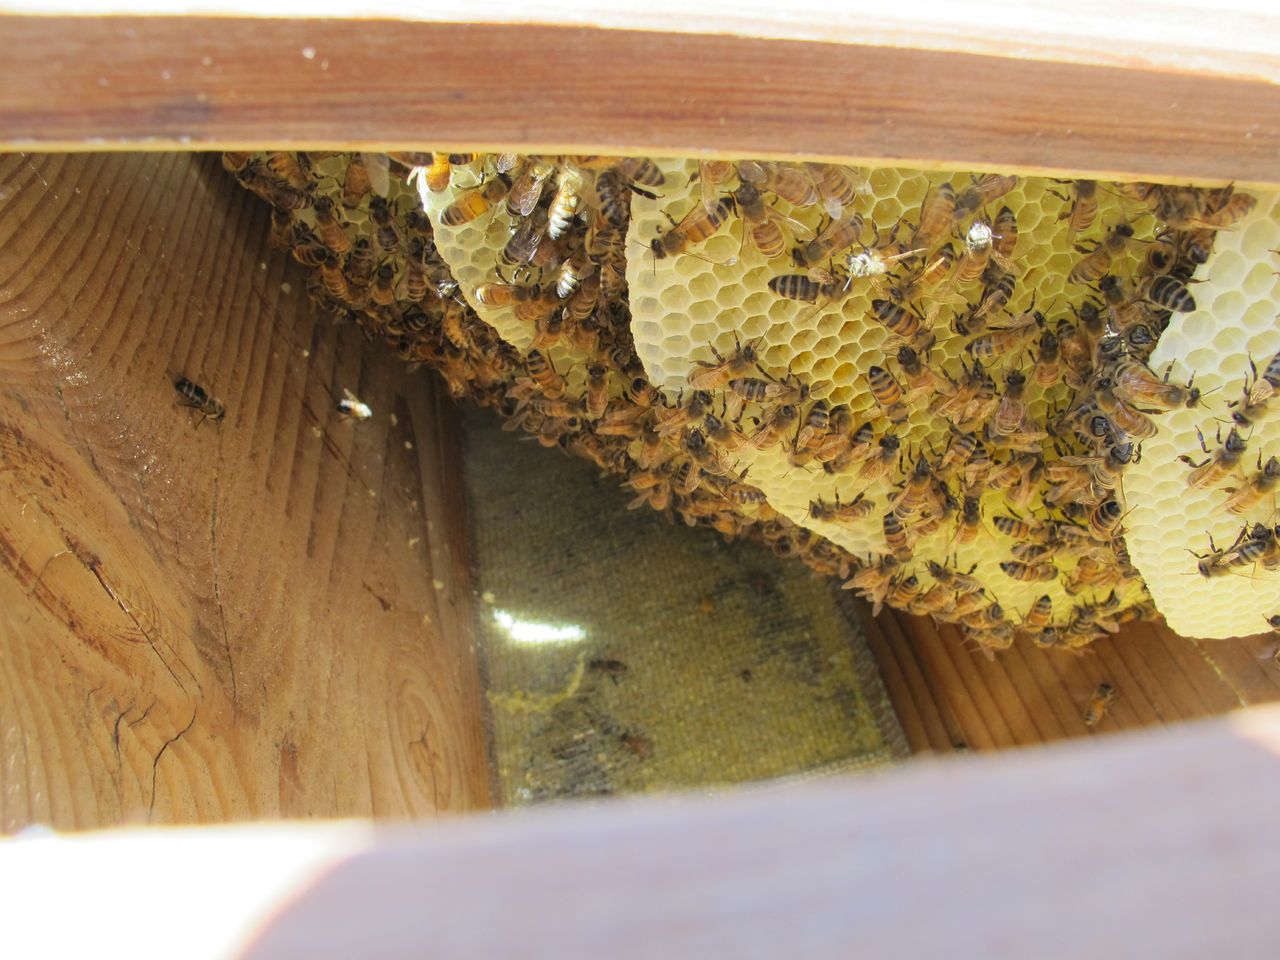 Bees - photo taken from entrance to the hive - photo courtesy of Doug Mendonca